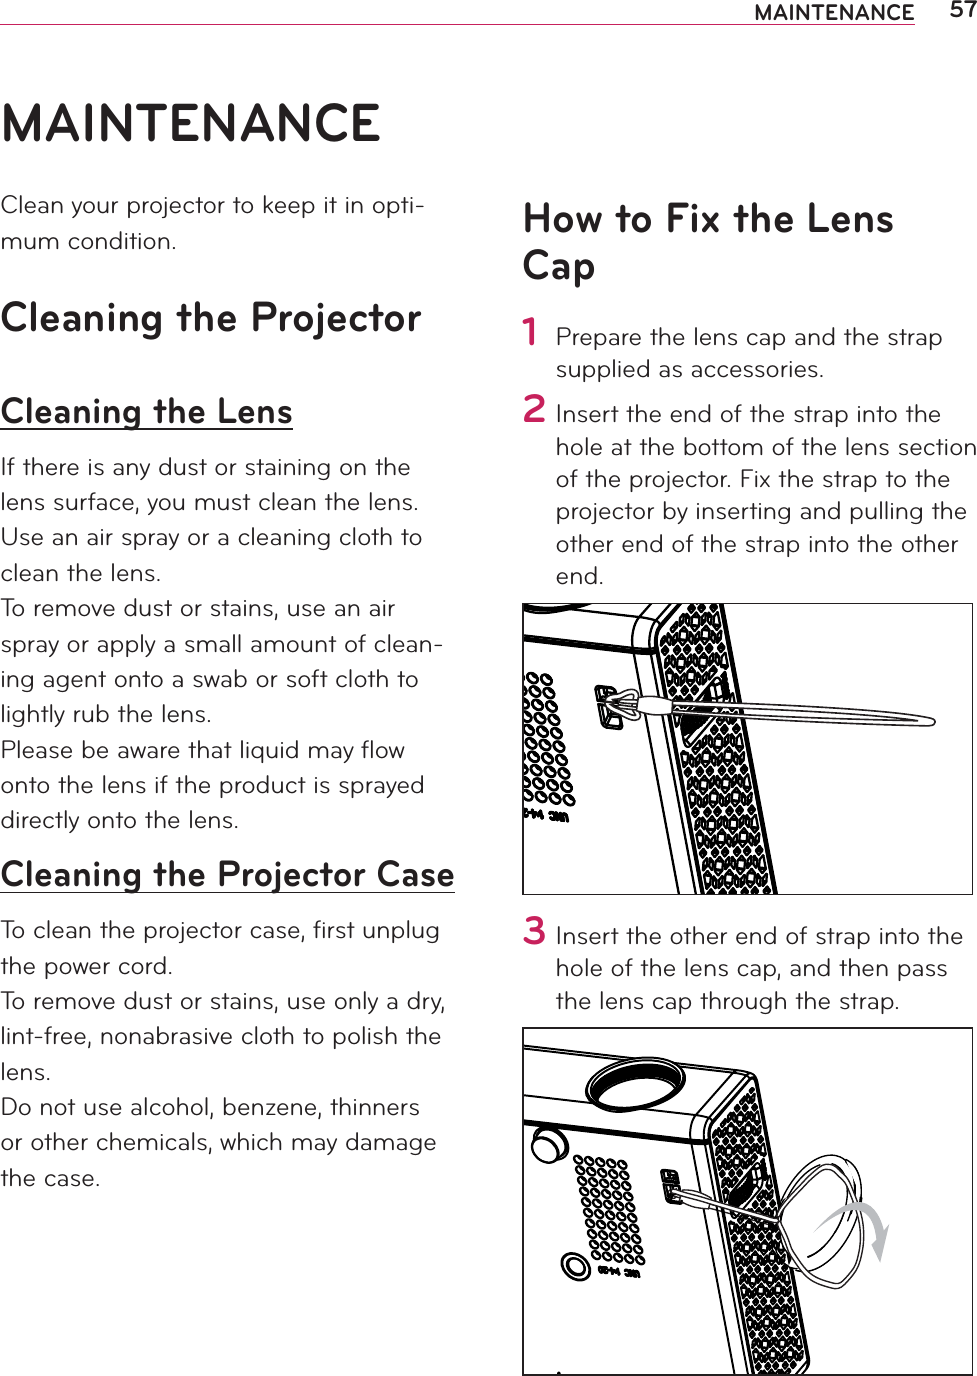 57MAINTENANCEMAINTENANCEClean your projector to keep it in opti-mum condition.Cleaning the ProjectorCleaning the LensIf there is any dust or staining on the lens surface, you must clean the lens.Use an air spray or a cleaning cloth to clean the lens.To remove dust or stains, use an air spray or apply a small amount of clean-ing agent onto a swab or soft cloth to lightly rub the lens.Please be aware that liquid may ﬂow onto the lens if the product is sprayed directly onto the lens.Cleaning the Projector CaseTo clean the projector case, ﬁrst unplug the power cord.To remove dust or stains, use only a dry, lint-free, nonabrasive cloth to polish the lens.Do not use alcohol, benzene, thinners or other chemicals, which may damage the case.How to Fix the Lens Cap1 Prepare the lens cap and the strap supplied as accessories. 2 Insert the end of the strap into the hole at the bottom of the lens section of the projector. Fix the strap to the projector by inserting and pulling the other end of the strap into the other end.3 Insert the other end of strap into the hole of the lens cap, and then pass the lens cap through the strap.